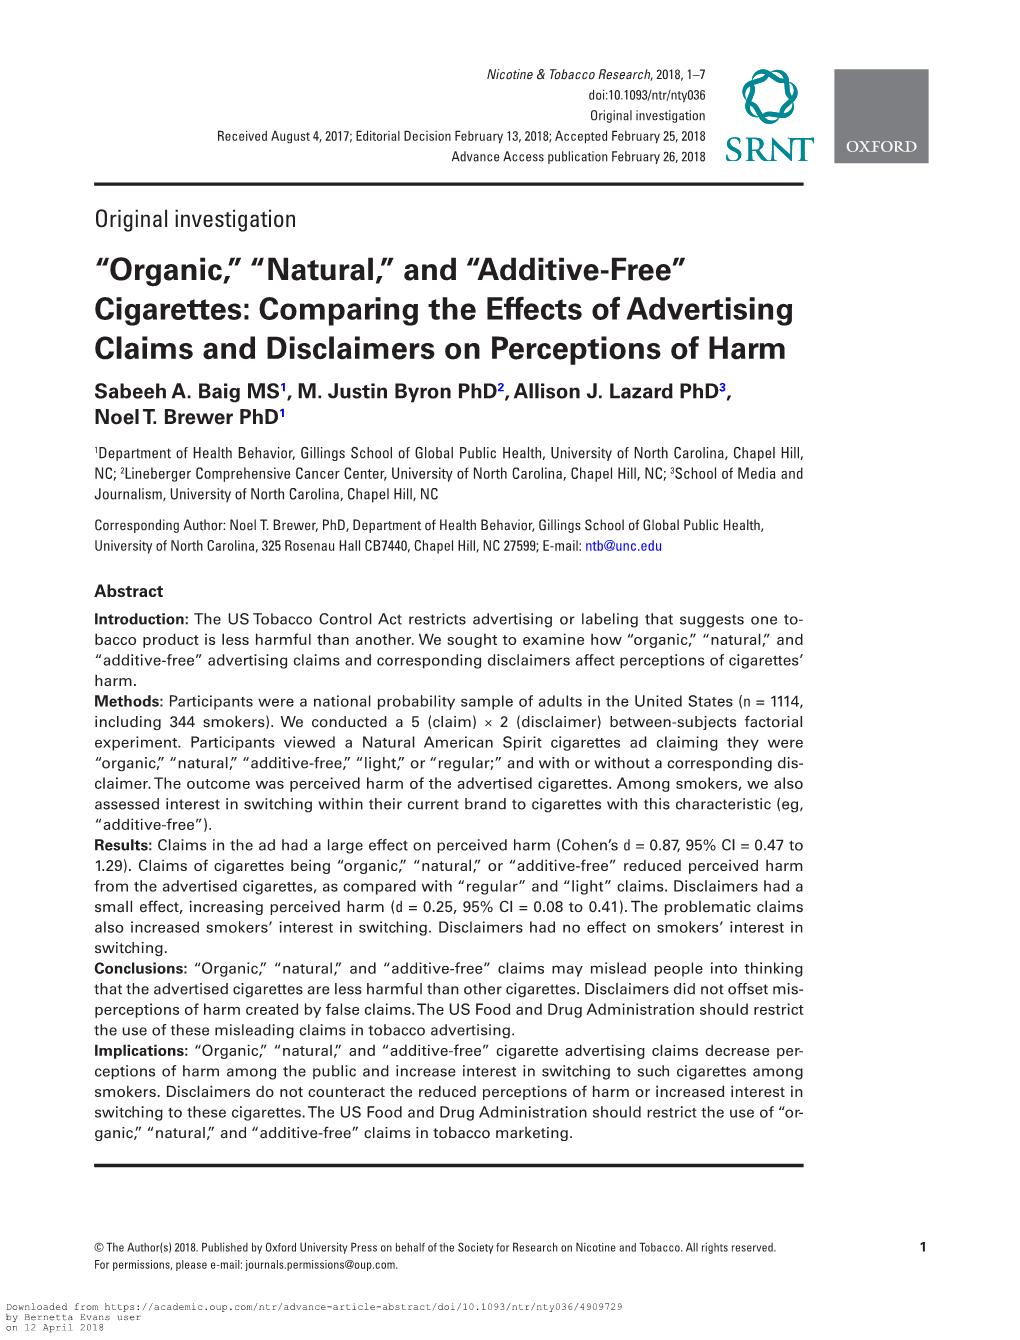 “Organic,” “Natural,” and “Additive-Free” Cigarettes: Comparing the Effects of Advertising Claims and Disclaimers on Perceptions of Harm Sabeeh A